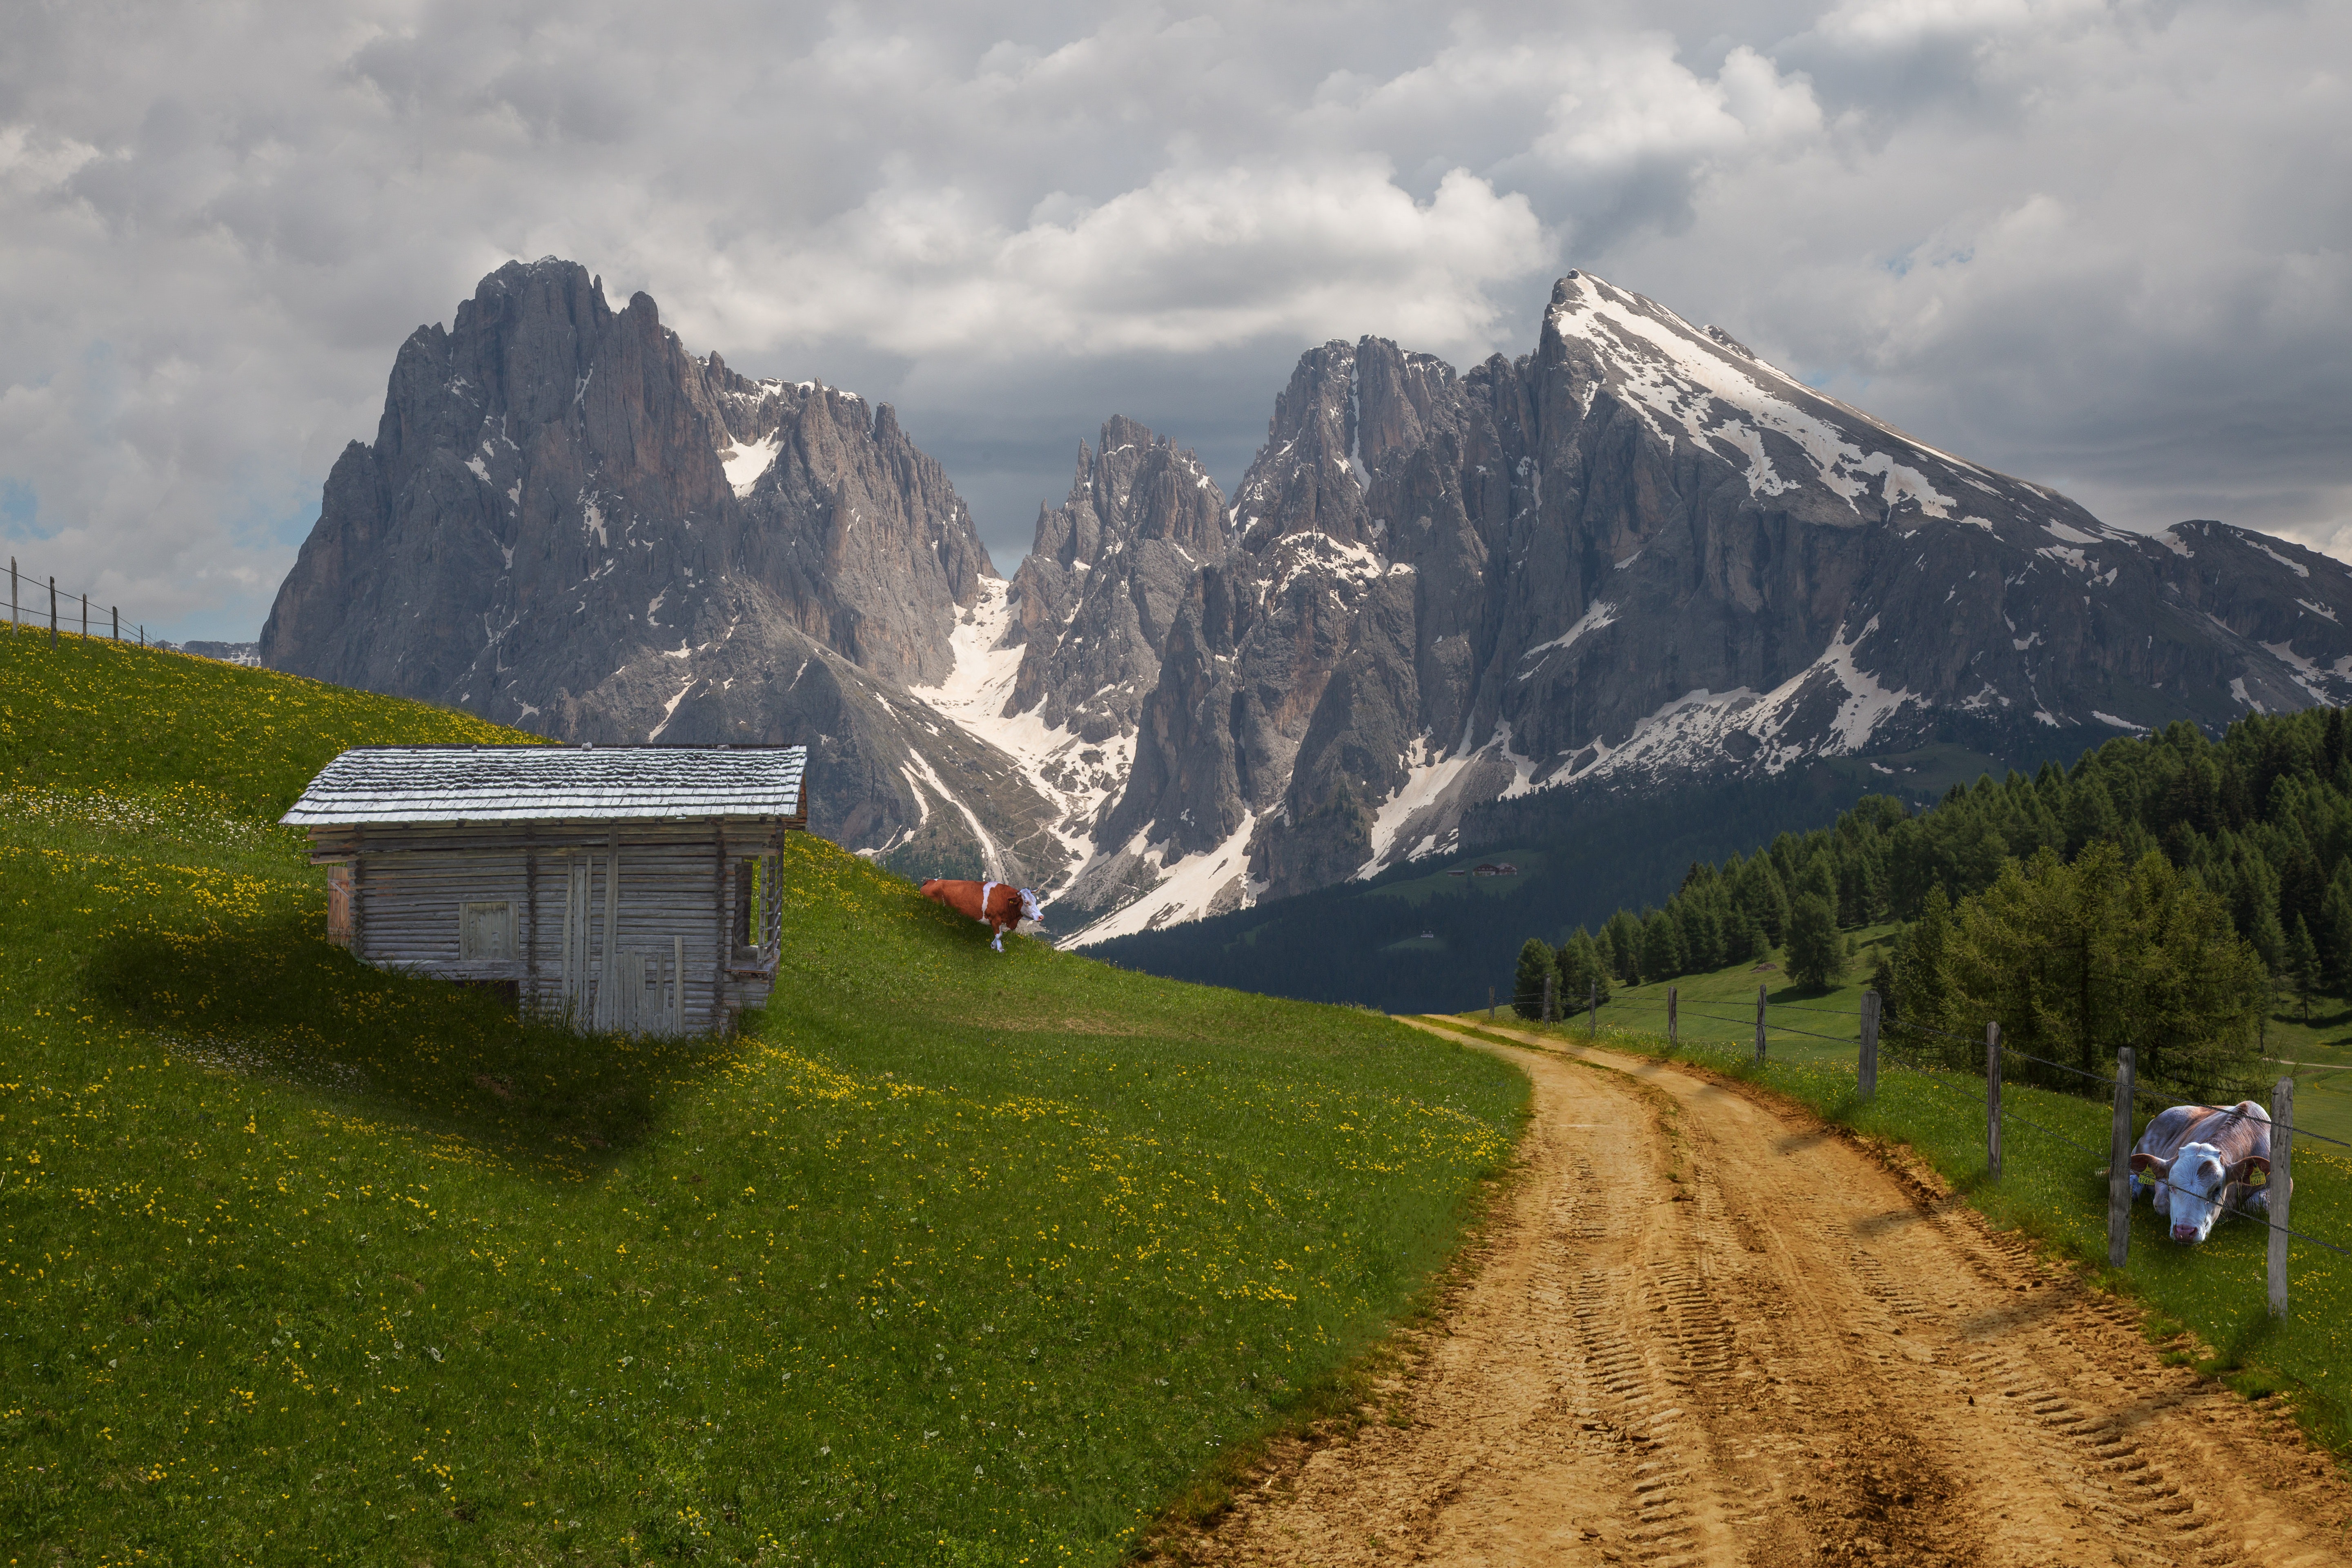 Snow Capped Mountain Distant from Cow and Brown Road, Summer, Rustic, Scenic, Shed, HQ Photo